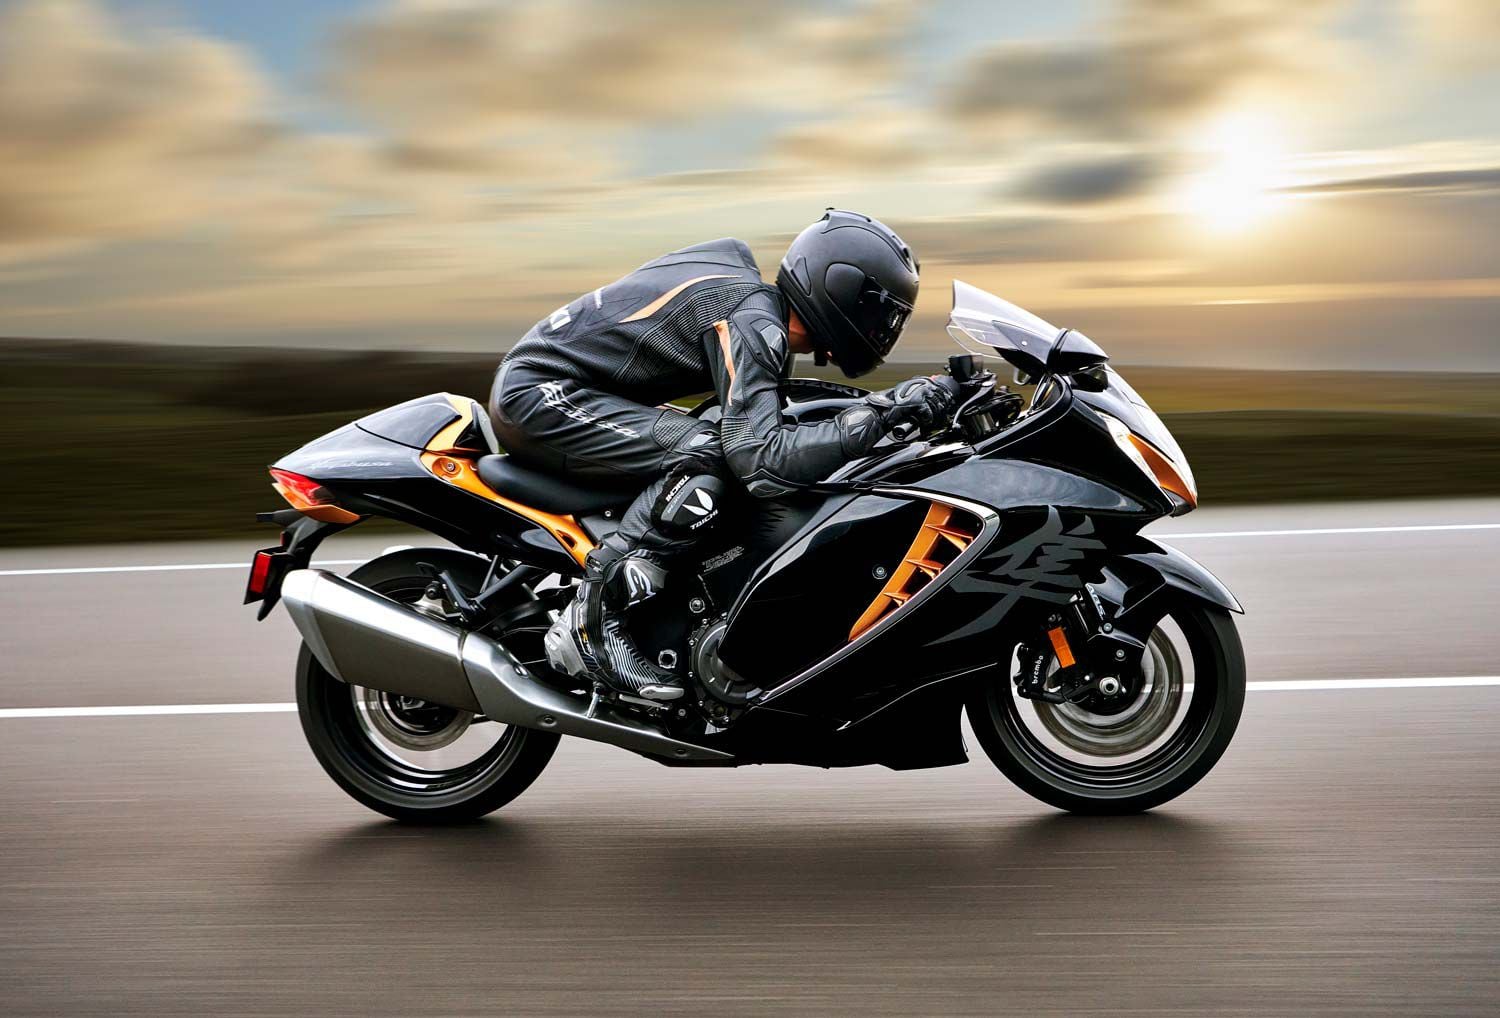 Suzuki knows the Hayabusa will see modified engines and induction systems, so has made changes to the GSX1300R’s engine to increase durability.